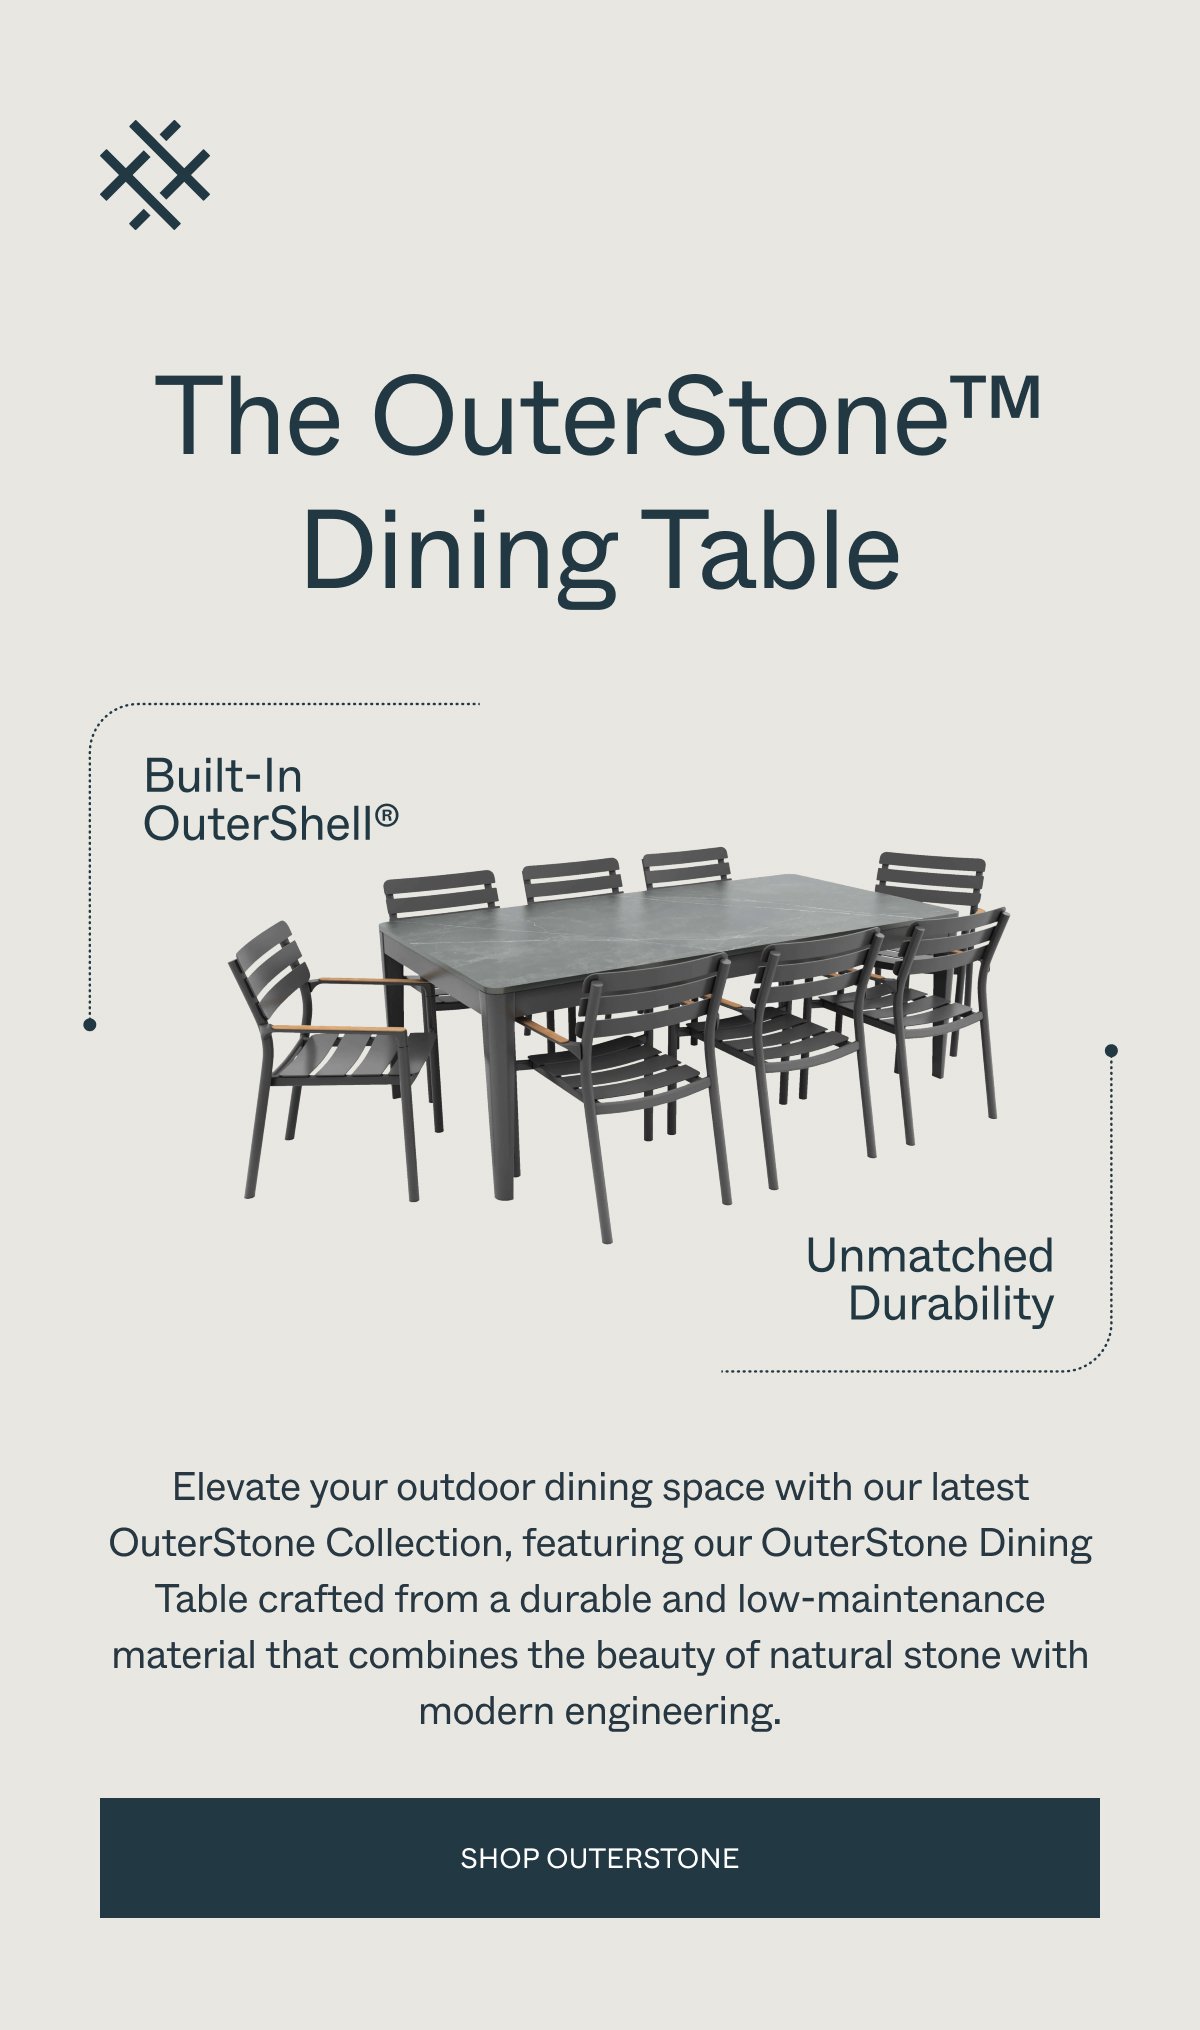 The OuterStone Dining Table Built-In OuterShell® Unmatched Durability Elevate your outdoor dining space with our latest OuterStone Collection, featuring our OuterStone Dining Table crafted from a durable and low-maintenance material that combines the beauty of natural stone with modern engineering. Shop OUTERSTONE